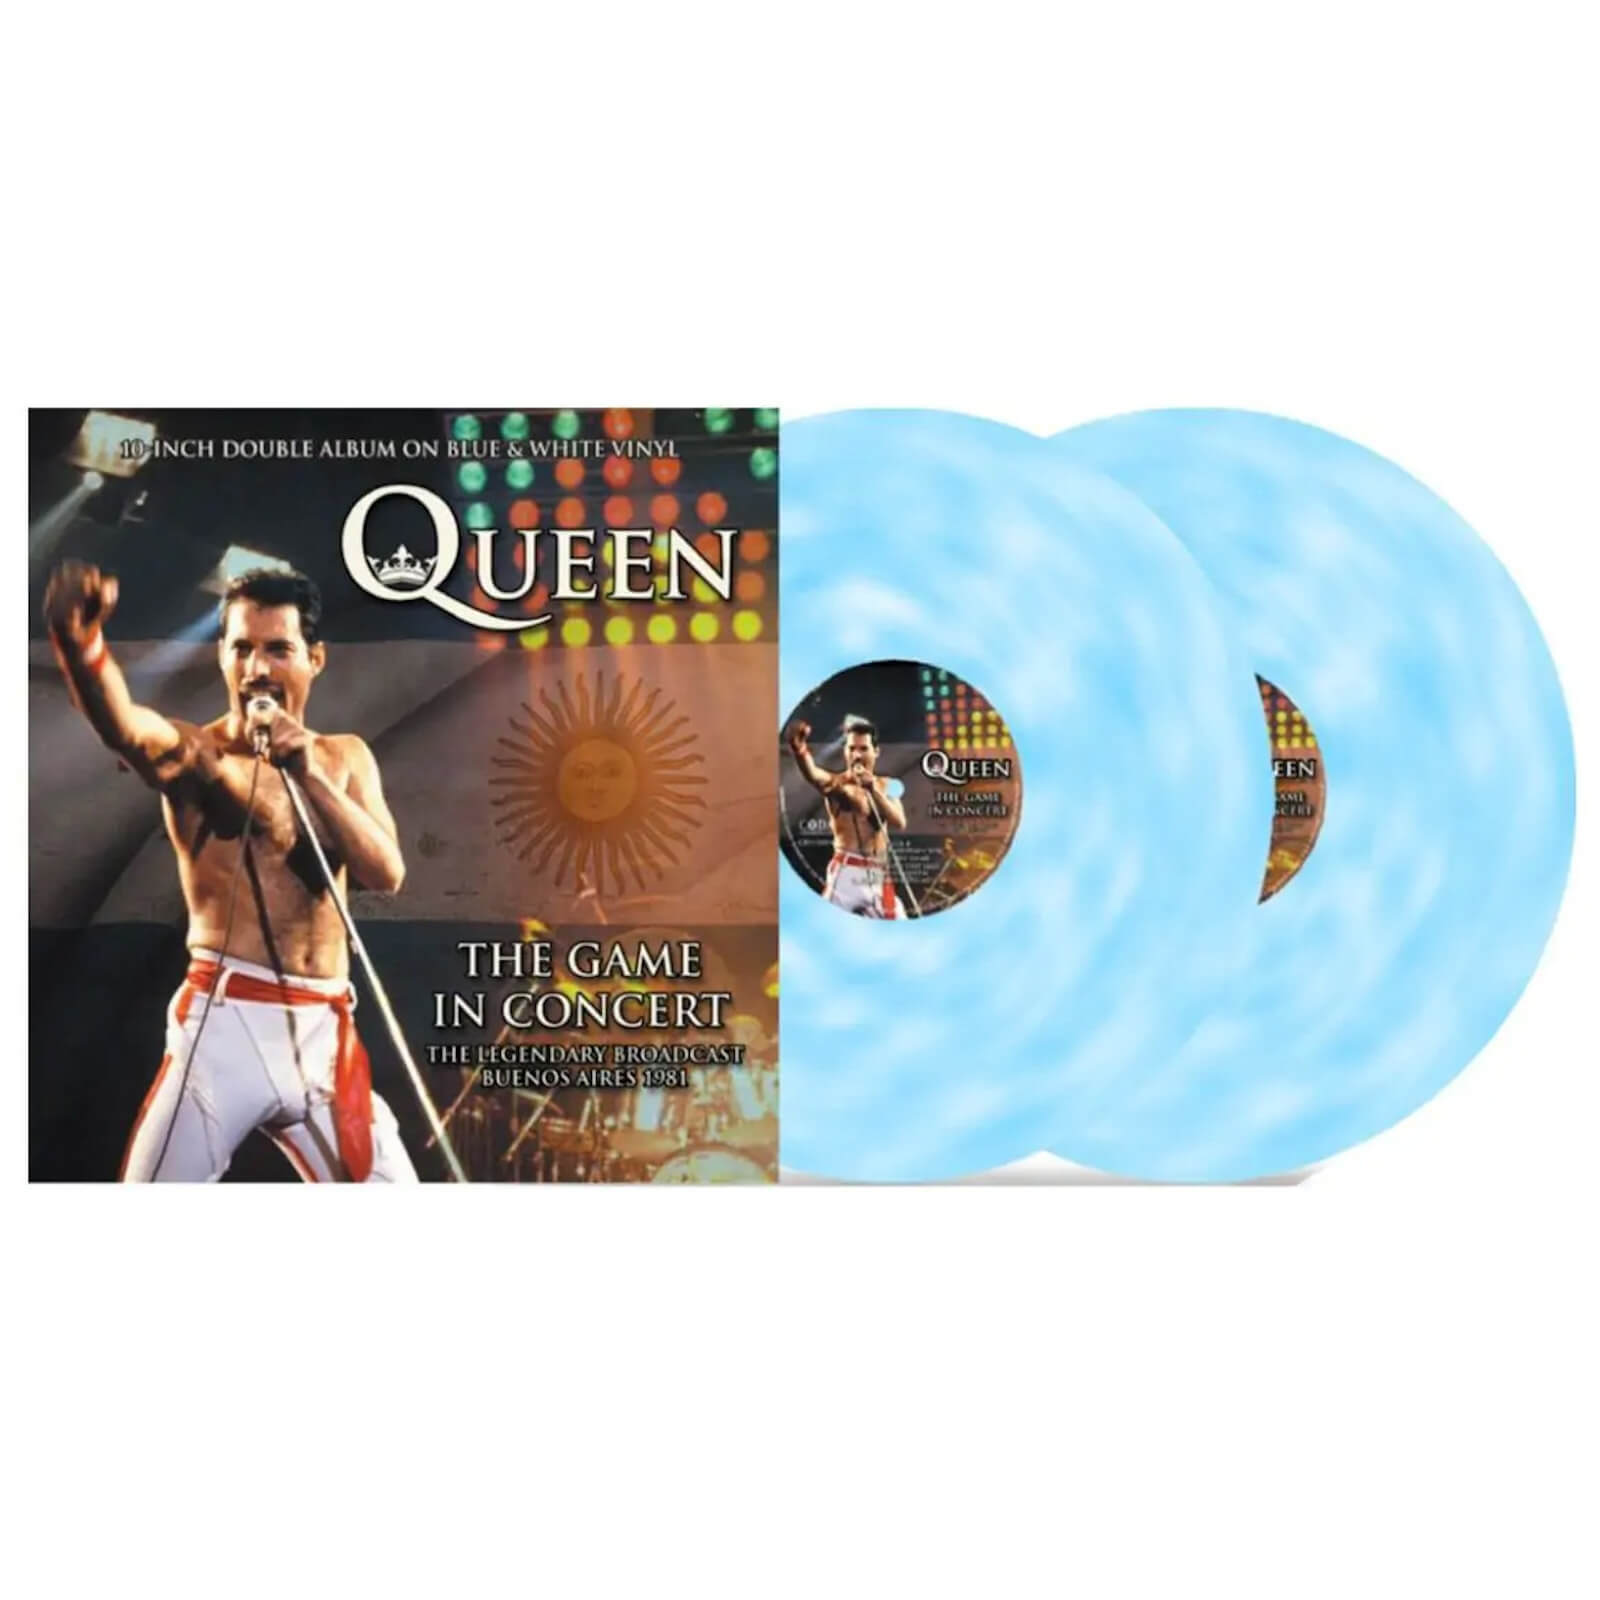 Coda Publishing - Queen - the game in concert (blue & white vinyl) 2x10